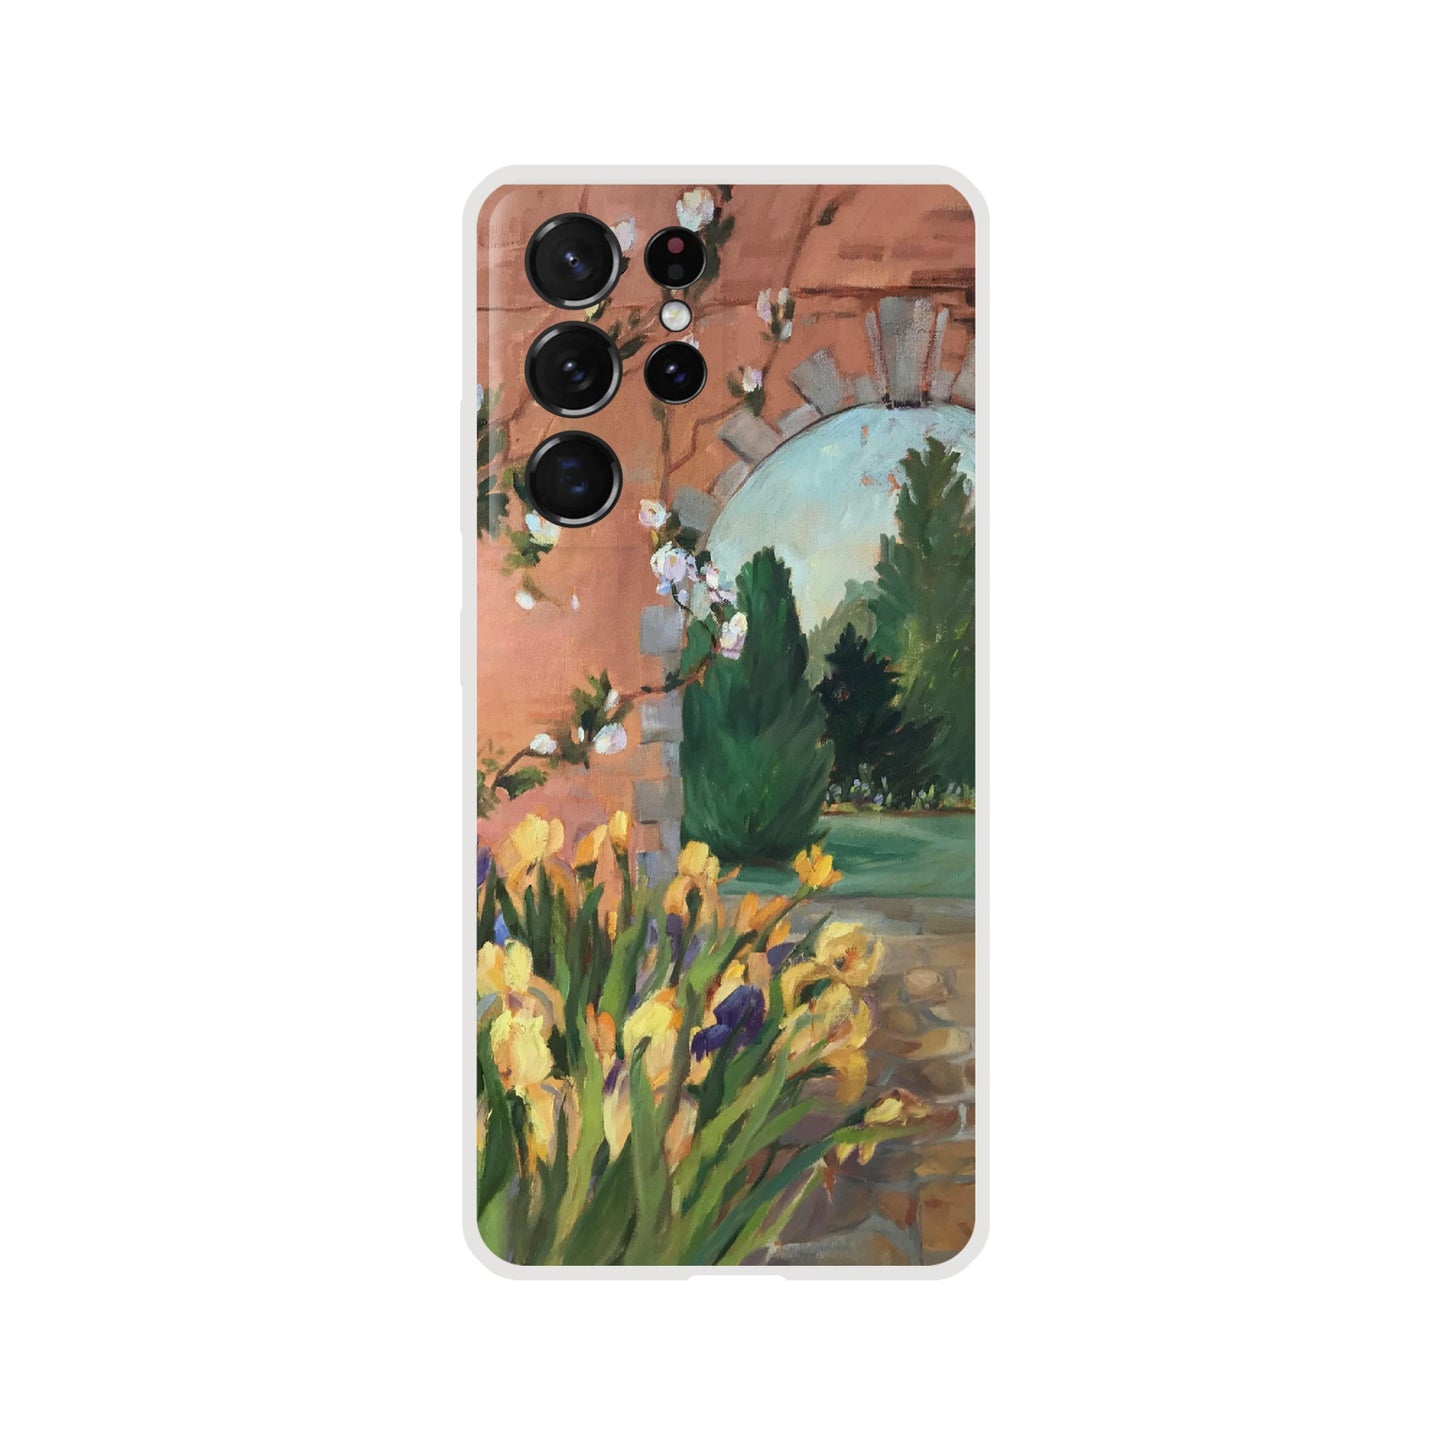 "Inner Garden" Flexi Phone Case for Iphone or Samsung by Barbara Cleary Designs